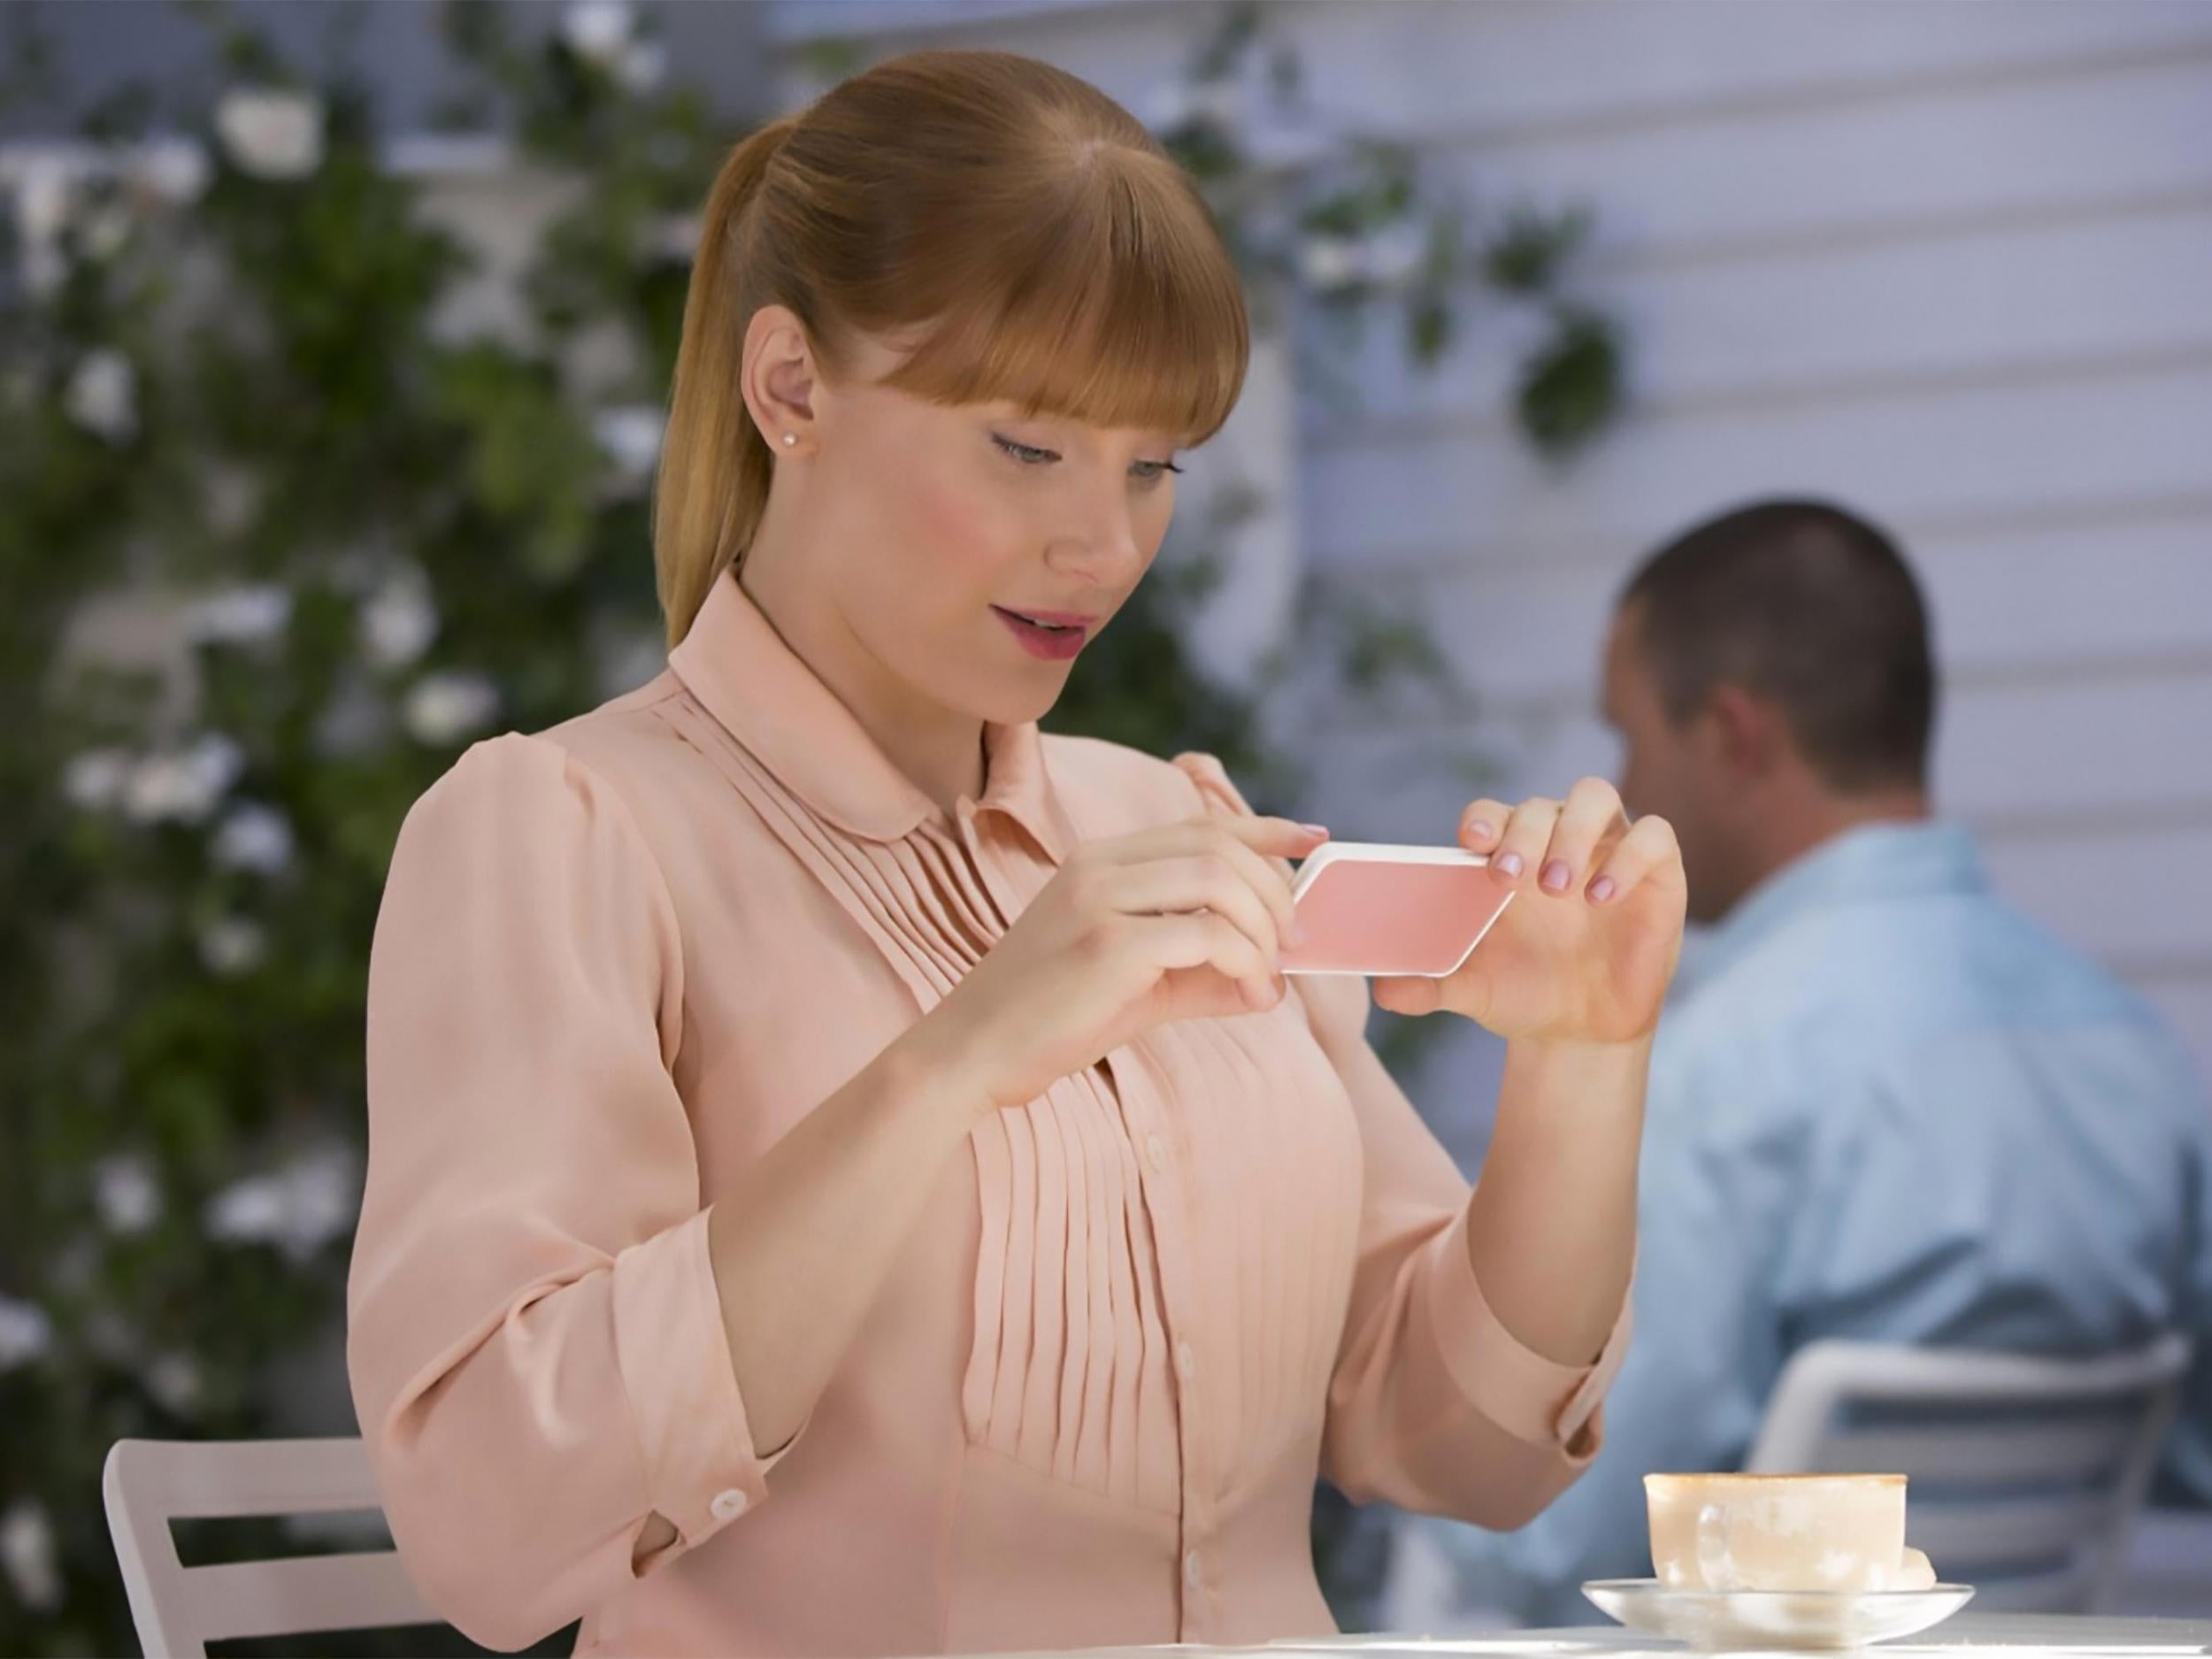 Lacie, the protagonist in the ‘Black Mirror’ episode ‘Nosedive’, rating her social interactions on her phone (Getty)